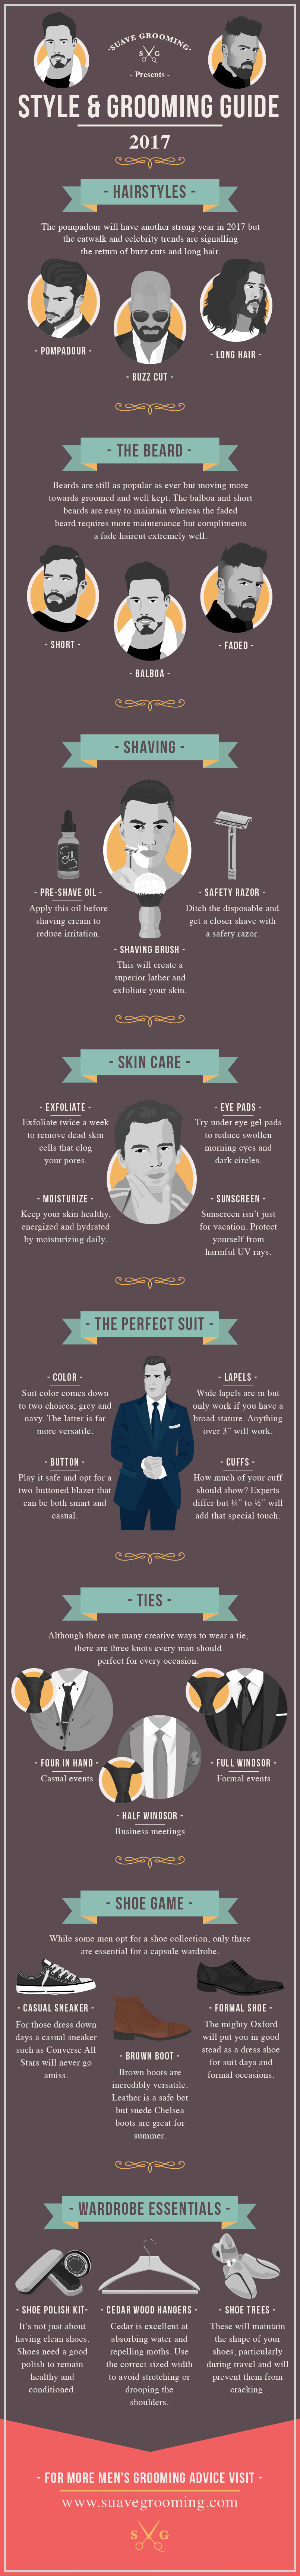 Suave Grooming's Style & Grooming Guide 2017